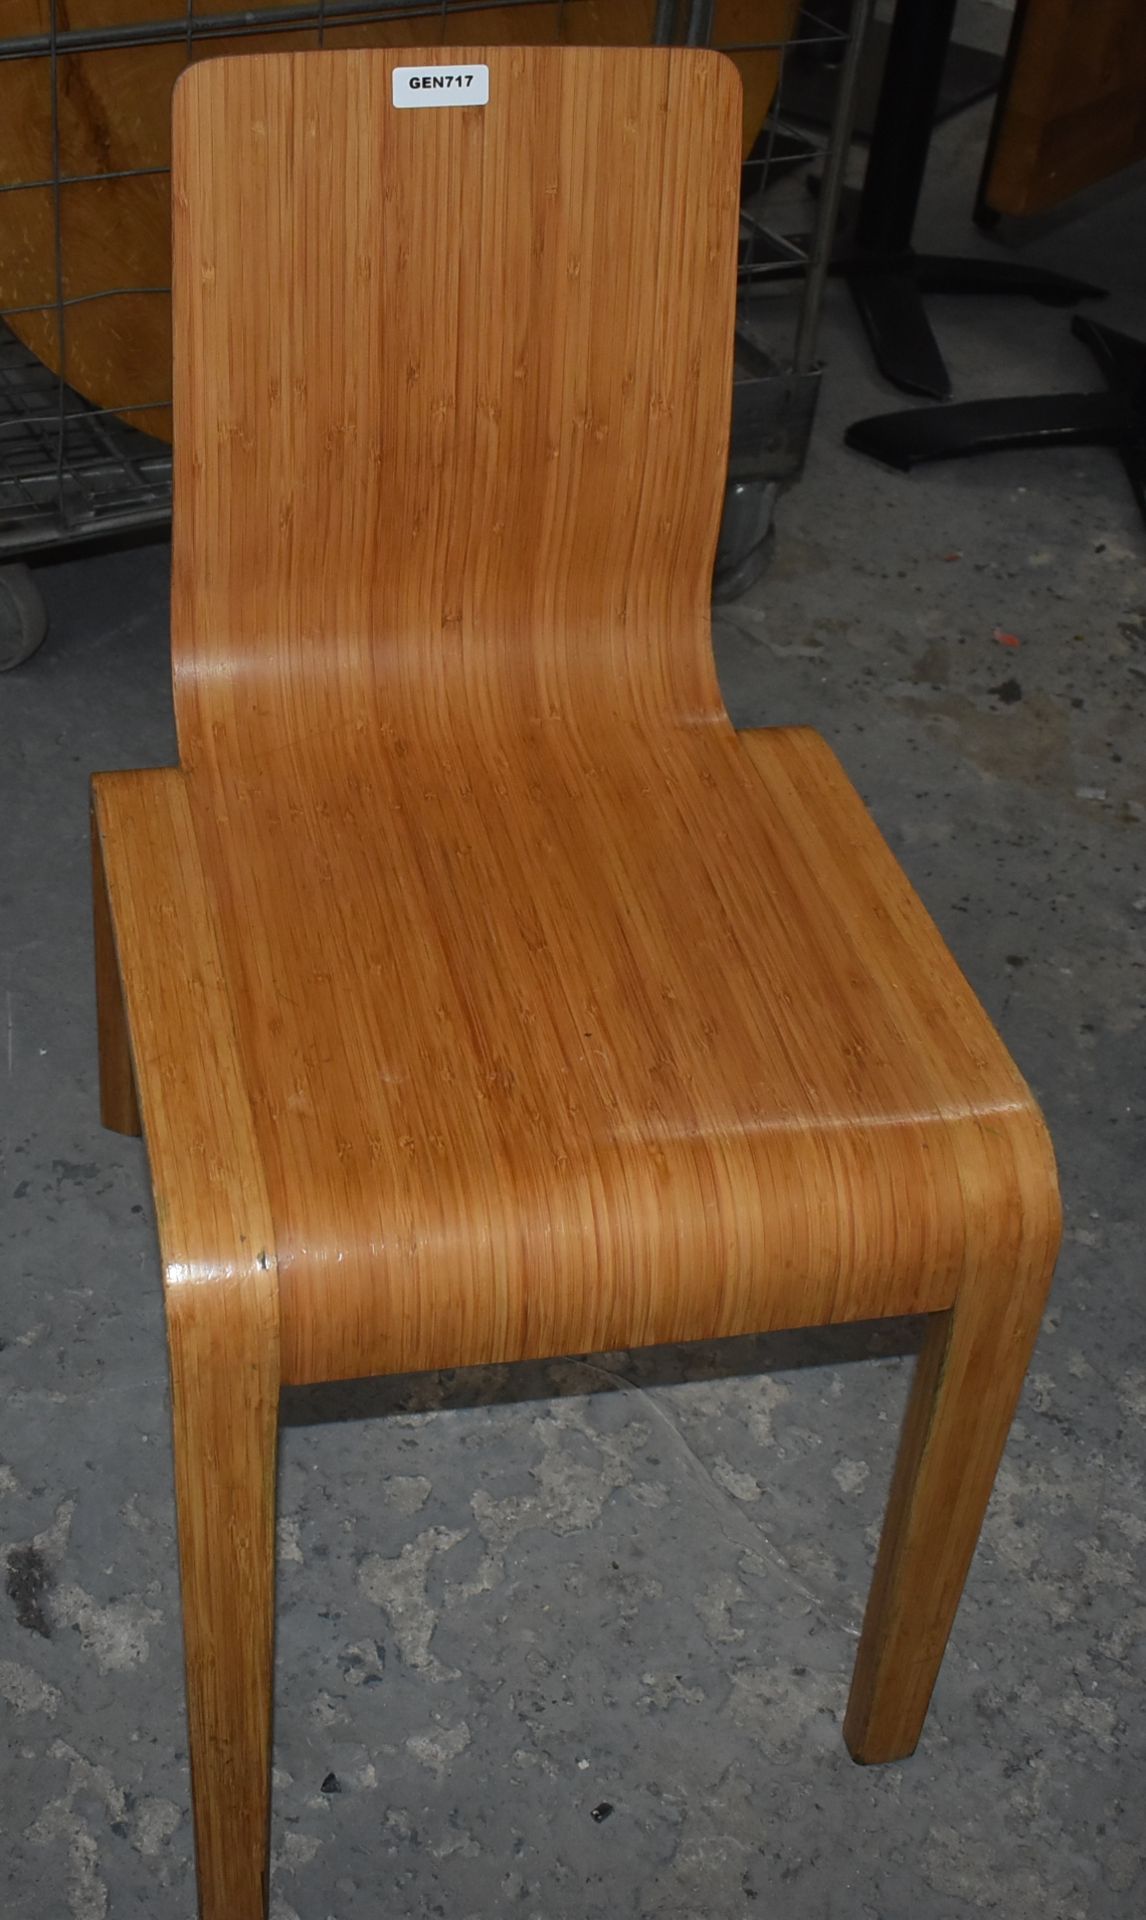 1 x Stylish Wooden Chair With A Curved Design - Dimensions: H80 x W42 x D58cm / Seat 44cm - Ref: - Image 7 of 7